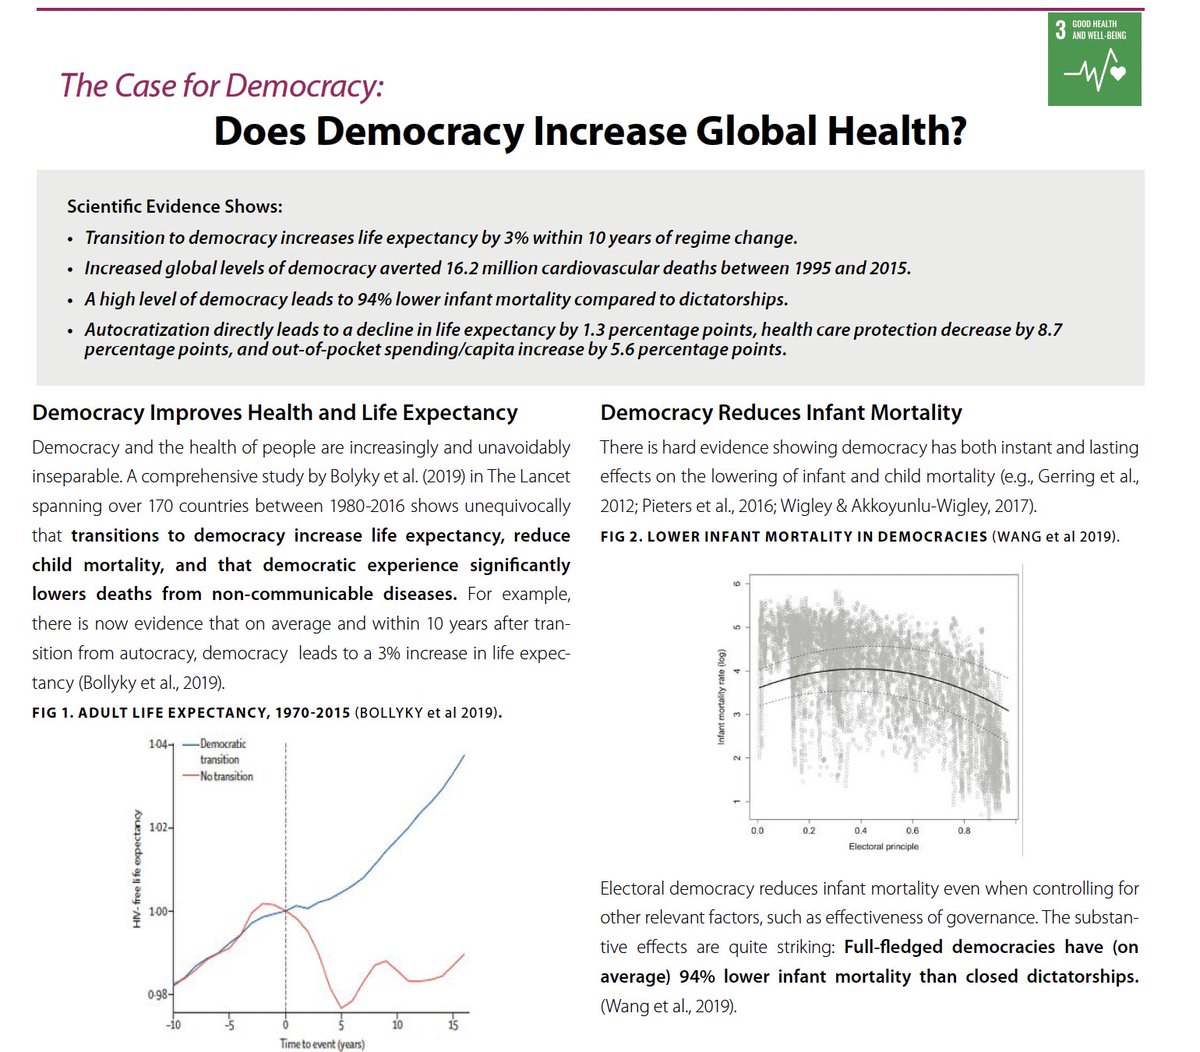 On health outcomes, democracies outperform autocracies in terms of infant mortality, life expectancy, etc: